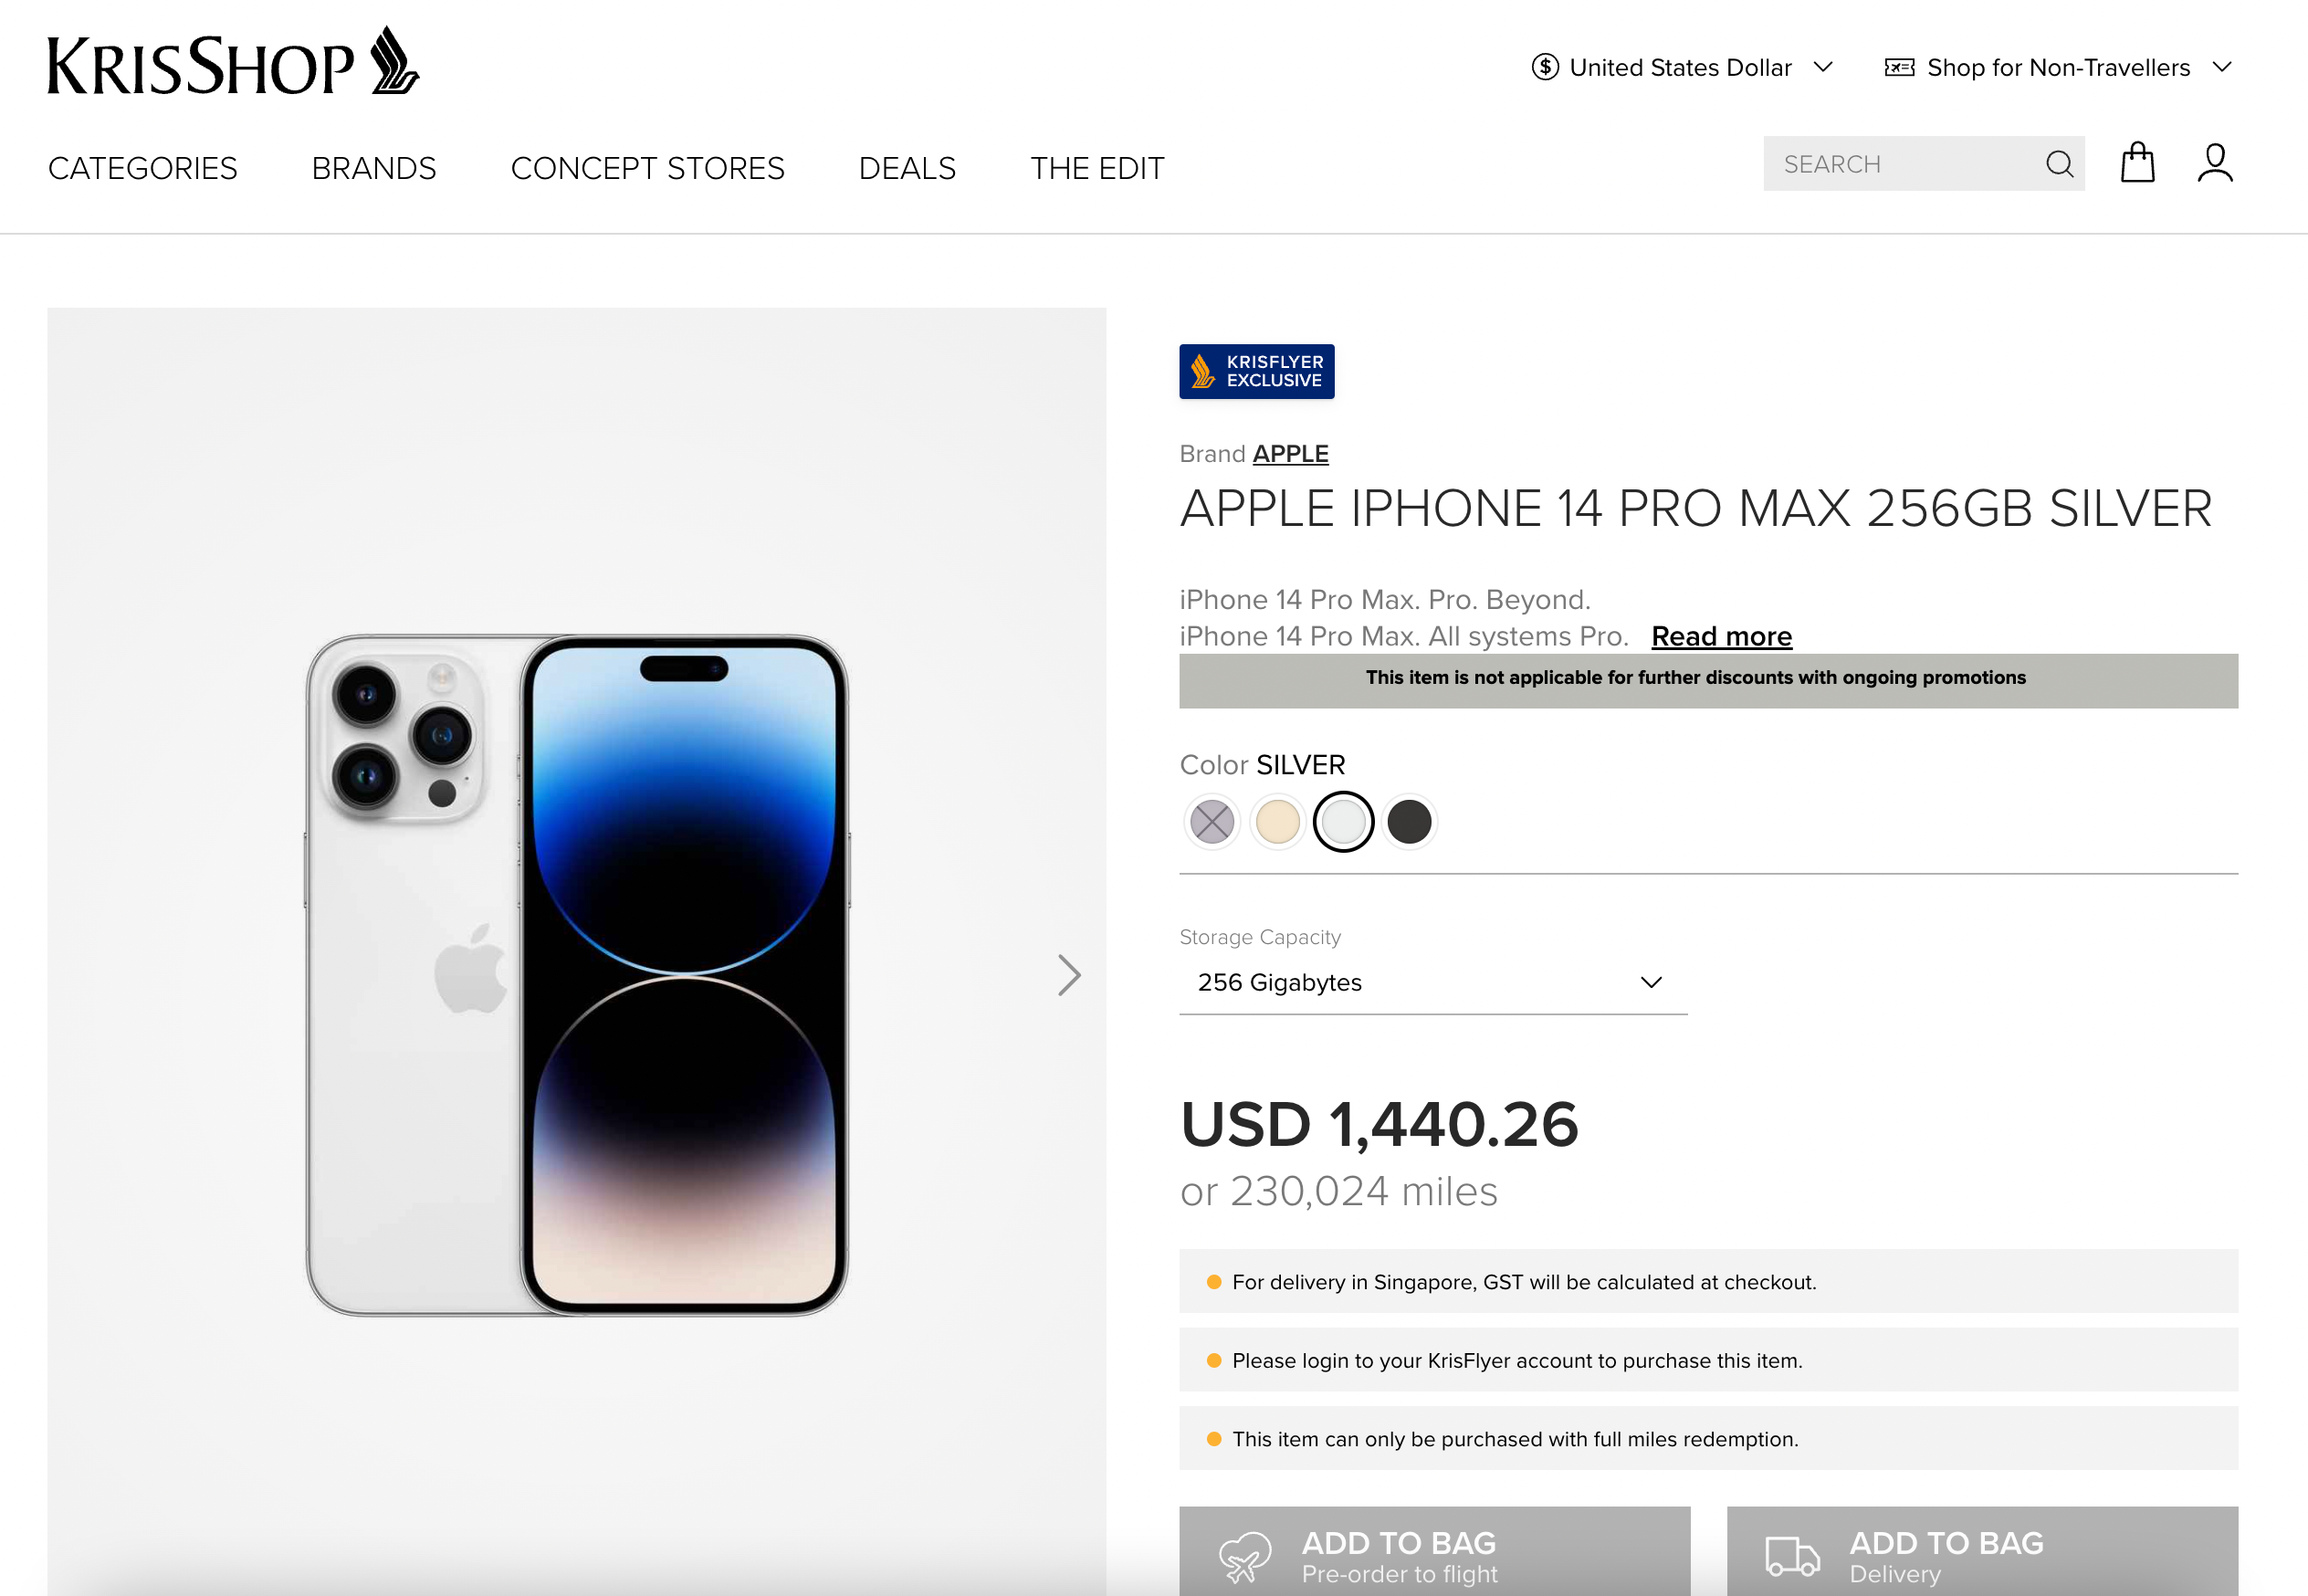 Buying an iPhone 14 Pro Max on KrisShop